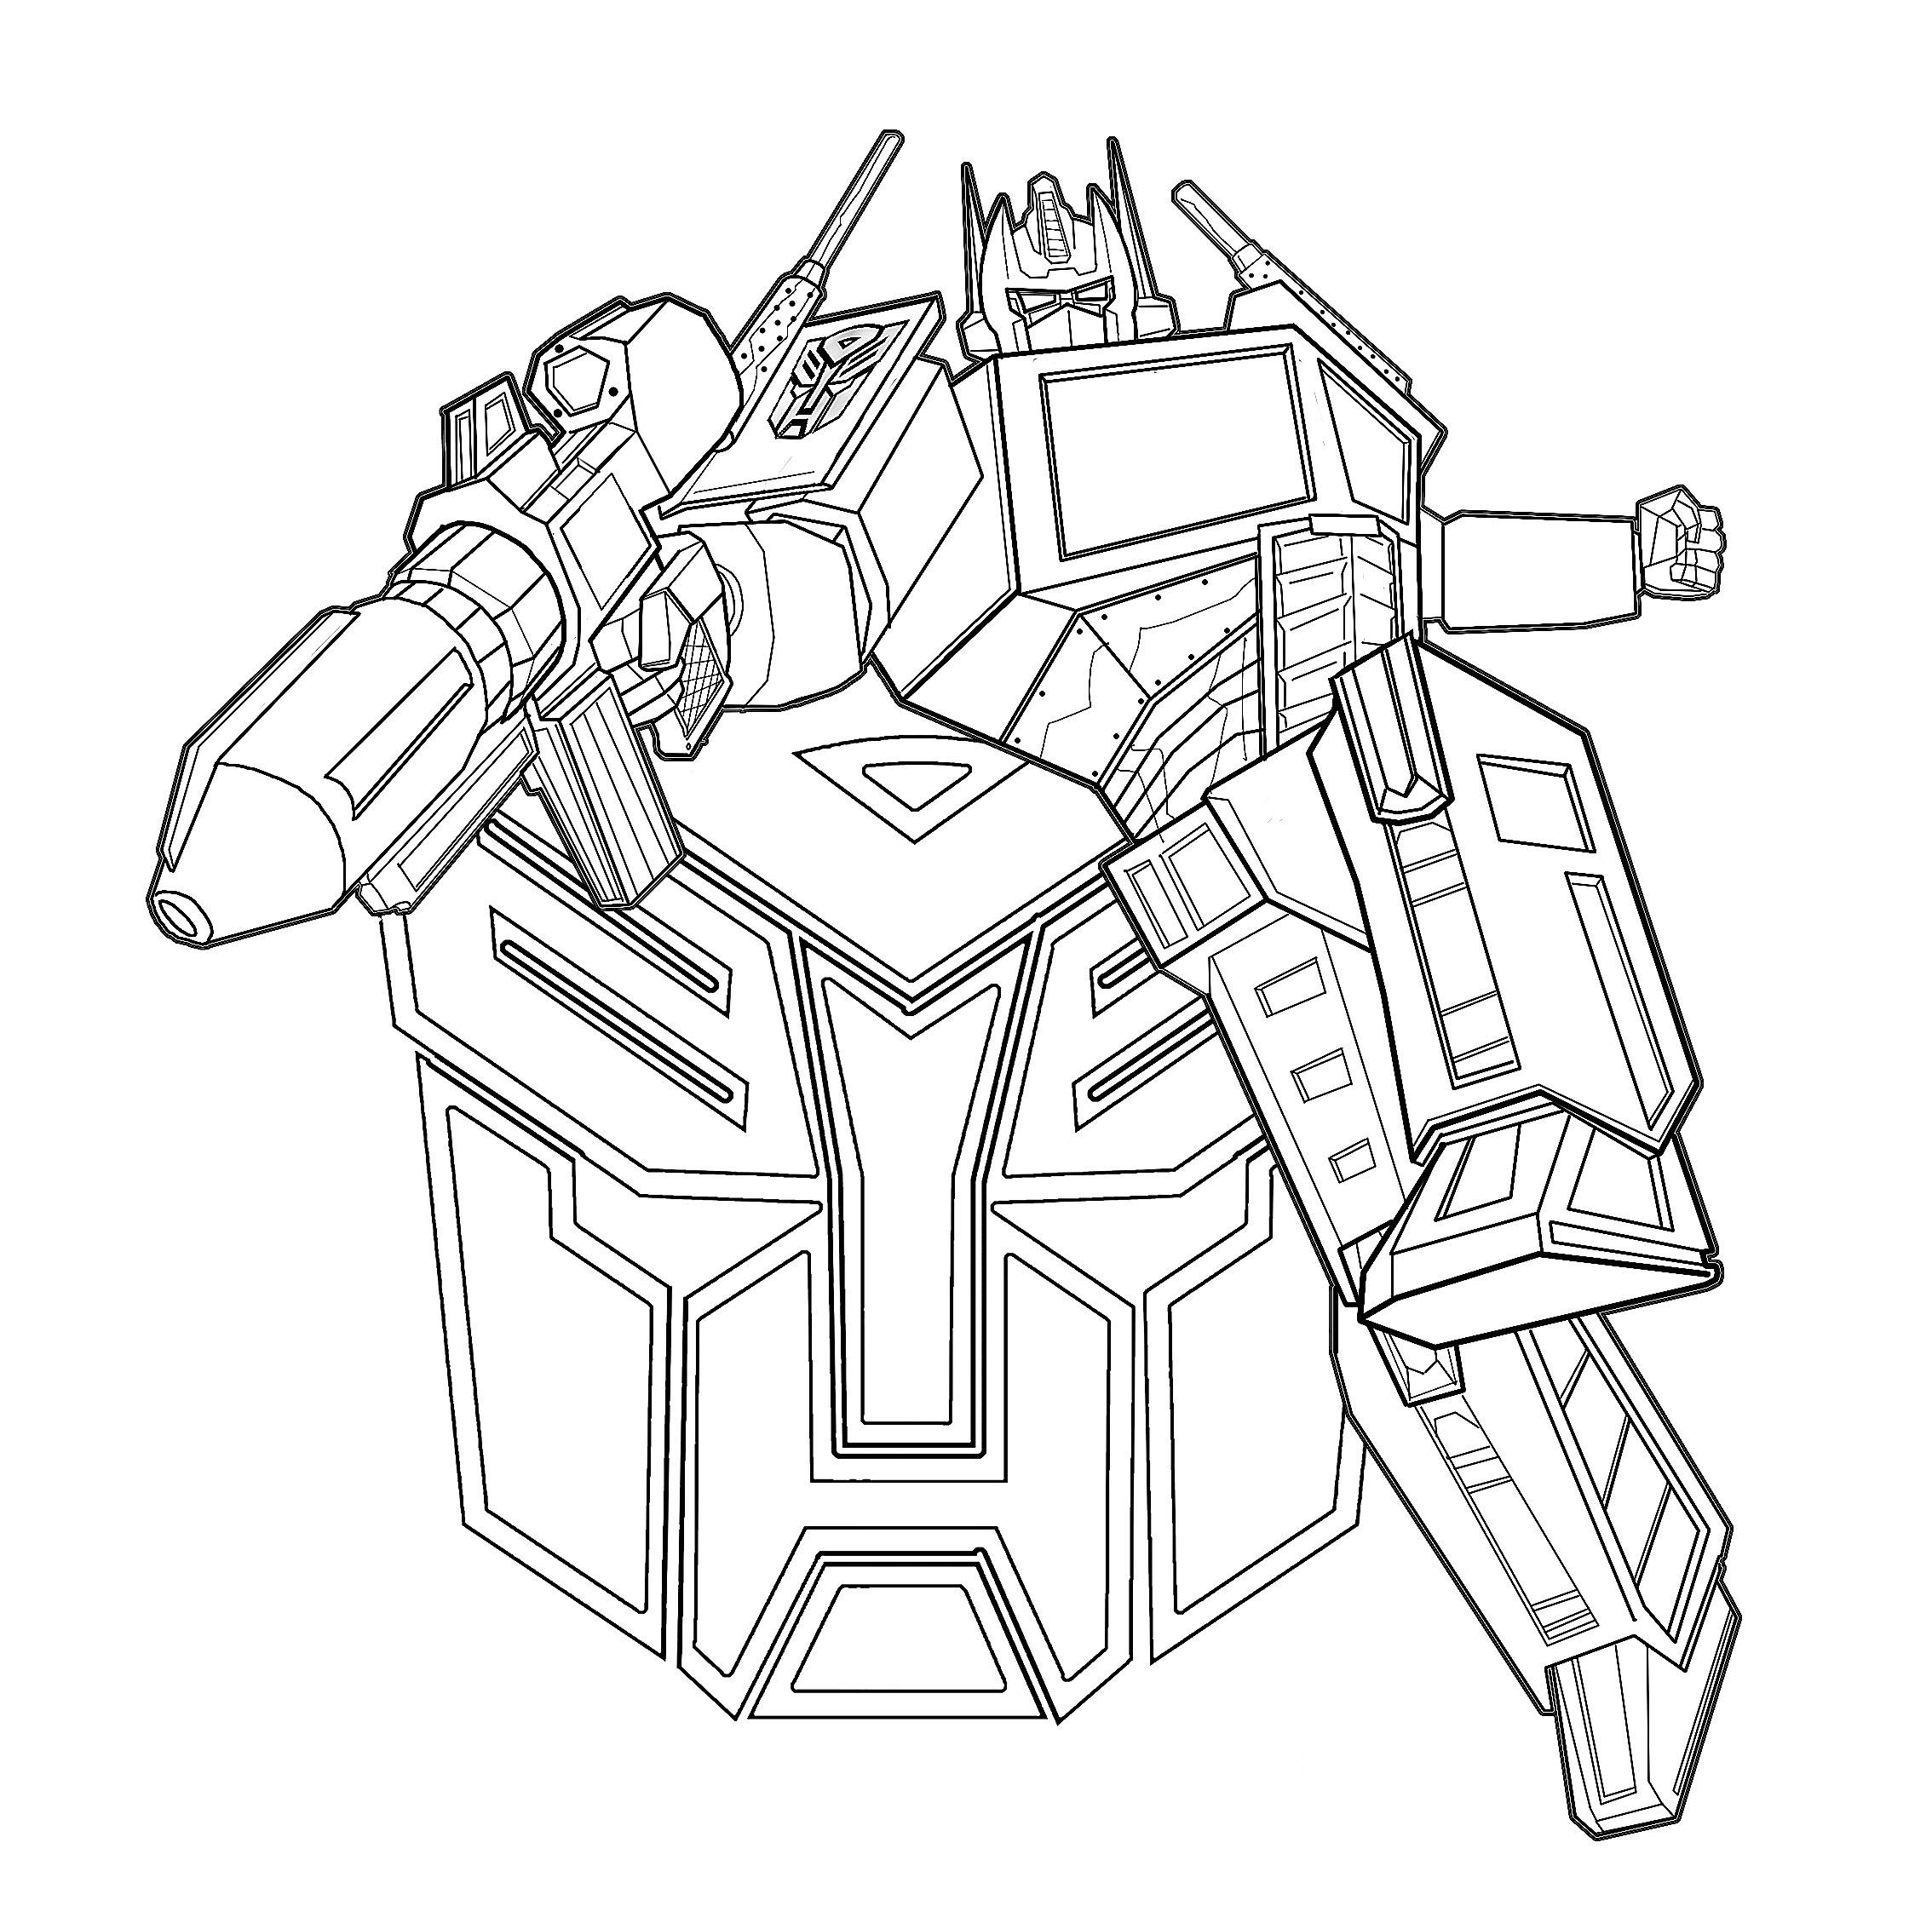 Megatron Coloring Pages Printable Transformers | Super Heroes ...